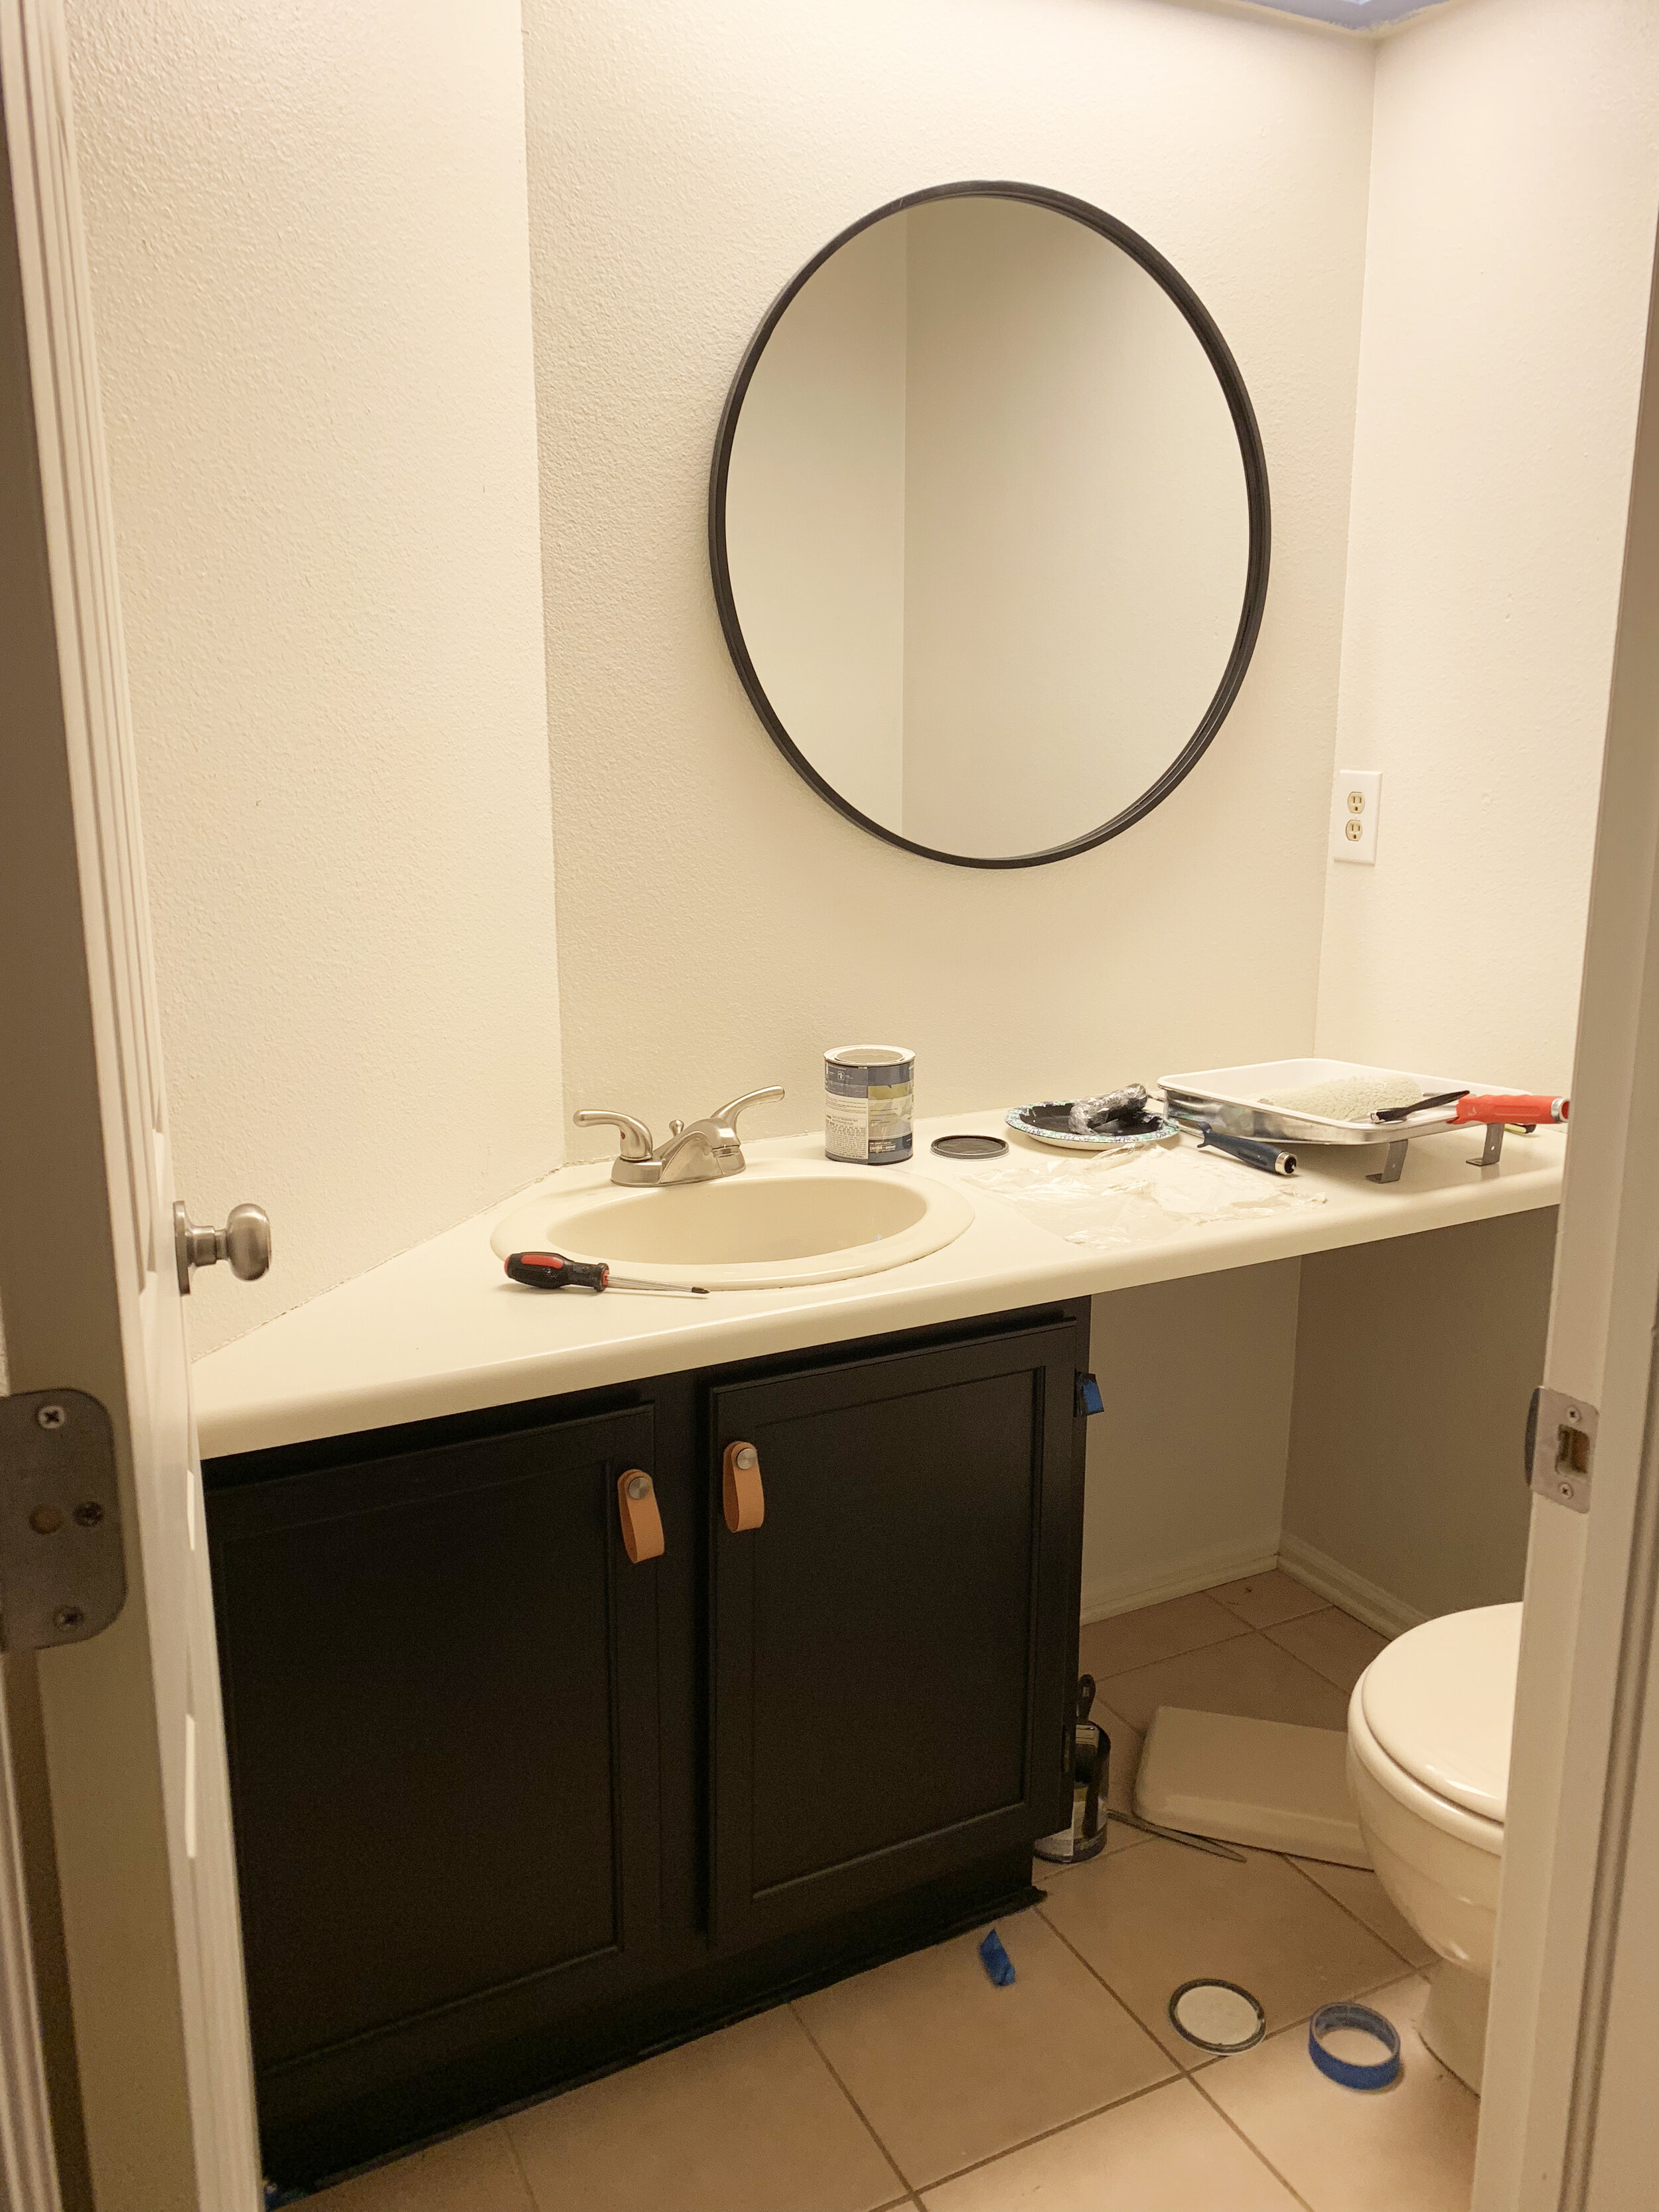  With this weird angled wall and sink placement, it was a debate on where the mirror should actually go. It landed on the bigger wall, and thats where it stayed. Definitely the better option after it was balanced out with some hooks and hand towels. 